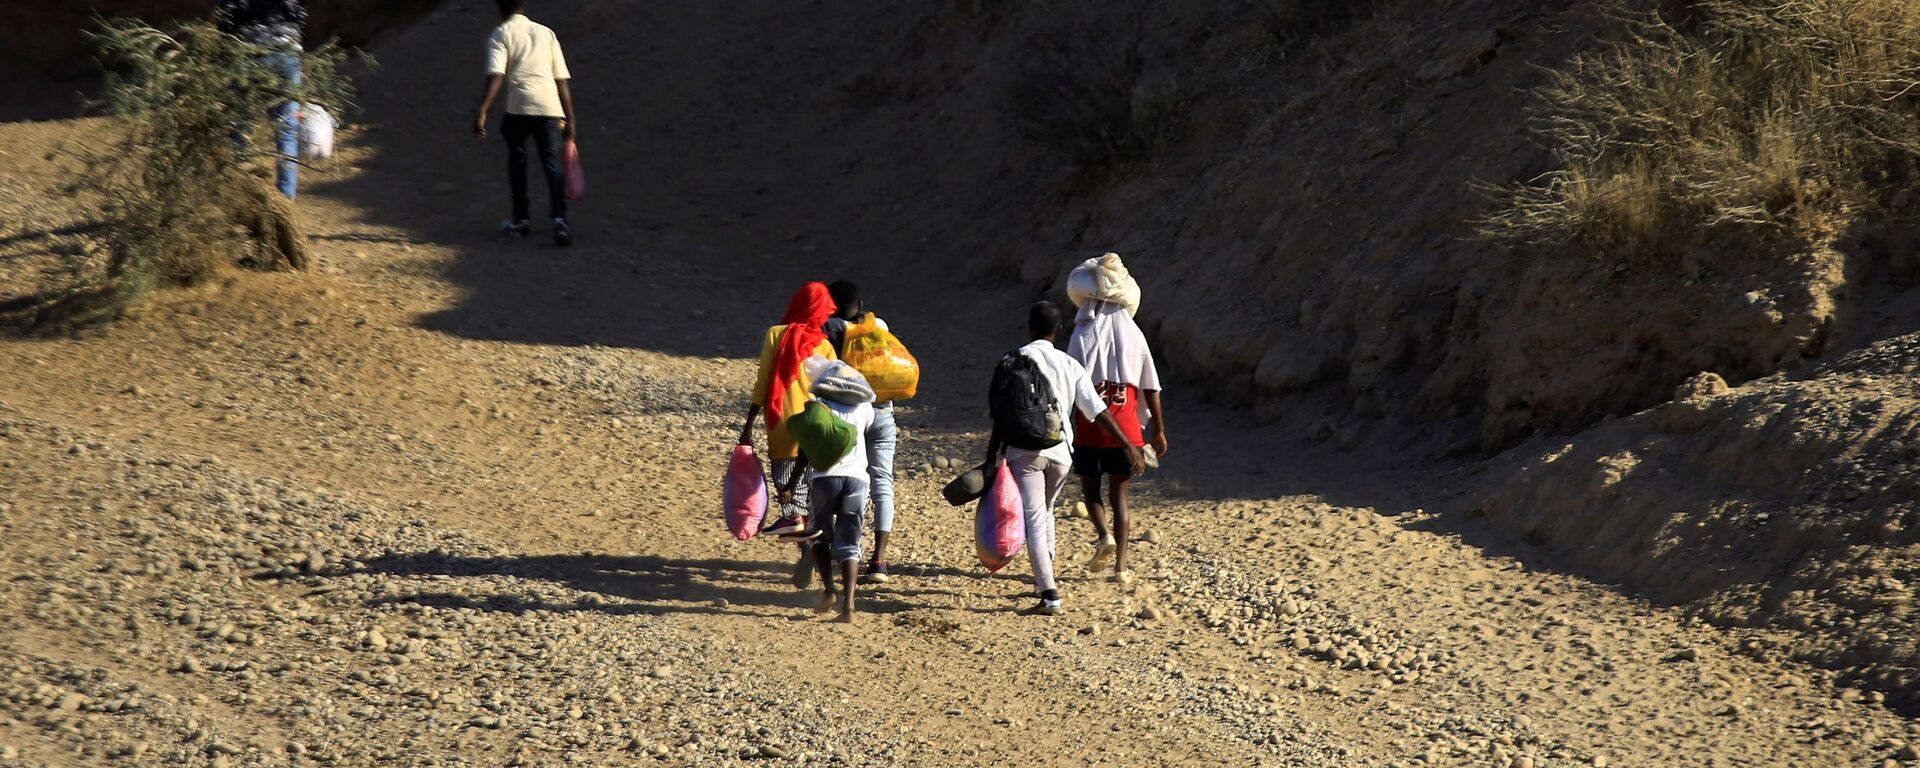 Ethiopians, who fled the ongoing fighting in Tigray region, carry their belongings after crossing the Setit River on the Sudan-Ethiopia border, in the eastern Kassala state, Sudan December 16, 2020. REUTERS/Mohamed Nureldin Abdallah/File Photo - Sputnik International, 1920, 02.03.2021